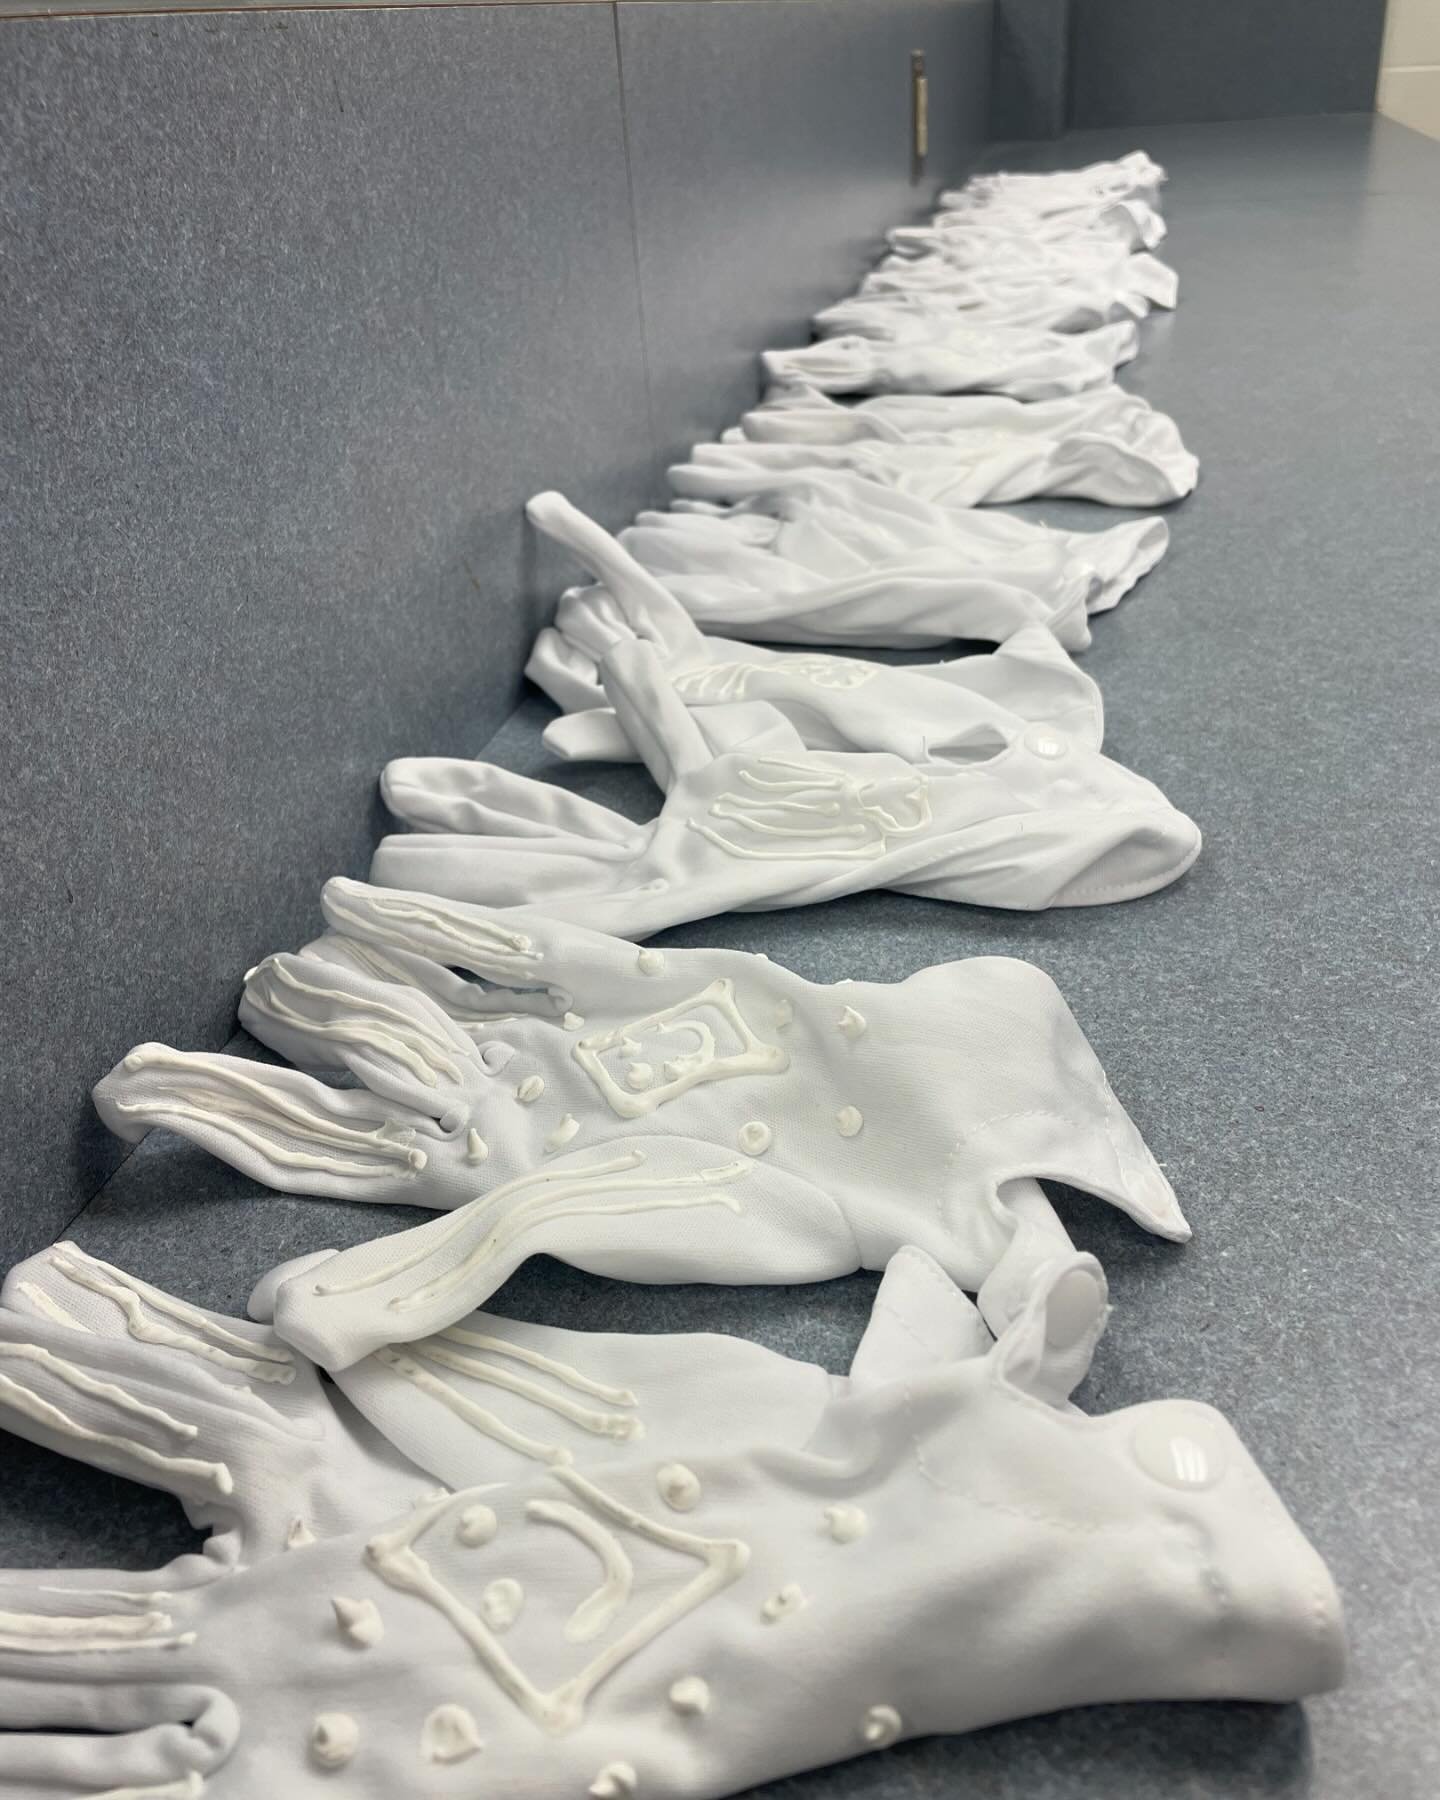 Tales of a Wardrobe Mistress&mdash;the show was yesterday. My jazz class wore gloves and because there was cartwheeling and gloves are slippery, I added puff paint to the palms of said gloves&mdash;and I did a different design on each pair so everyon